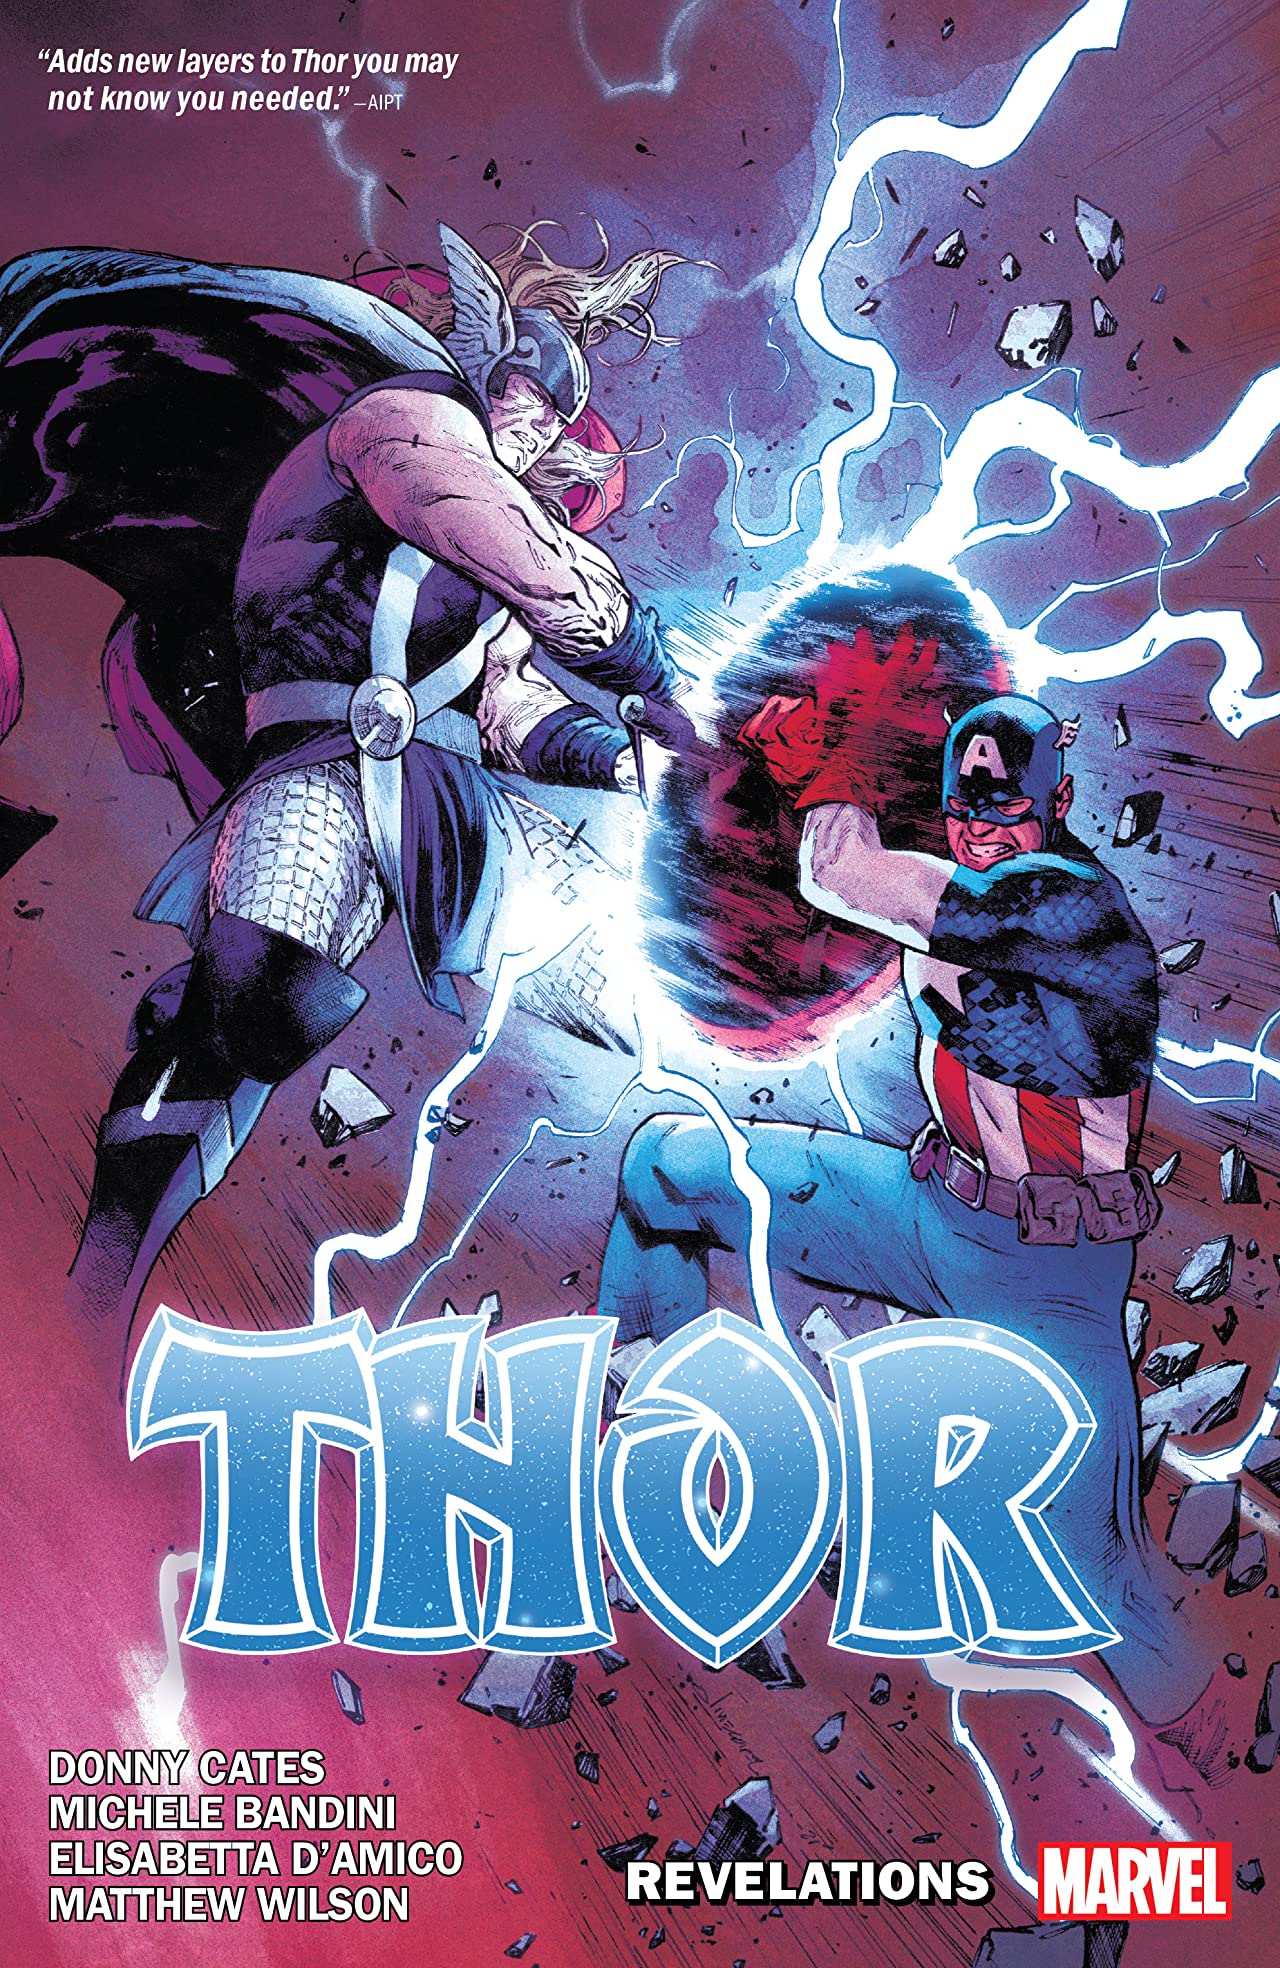 Thor by Donny Cates Vol. 3: Revelations (Trade Paperback)